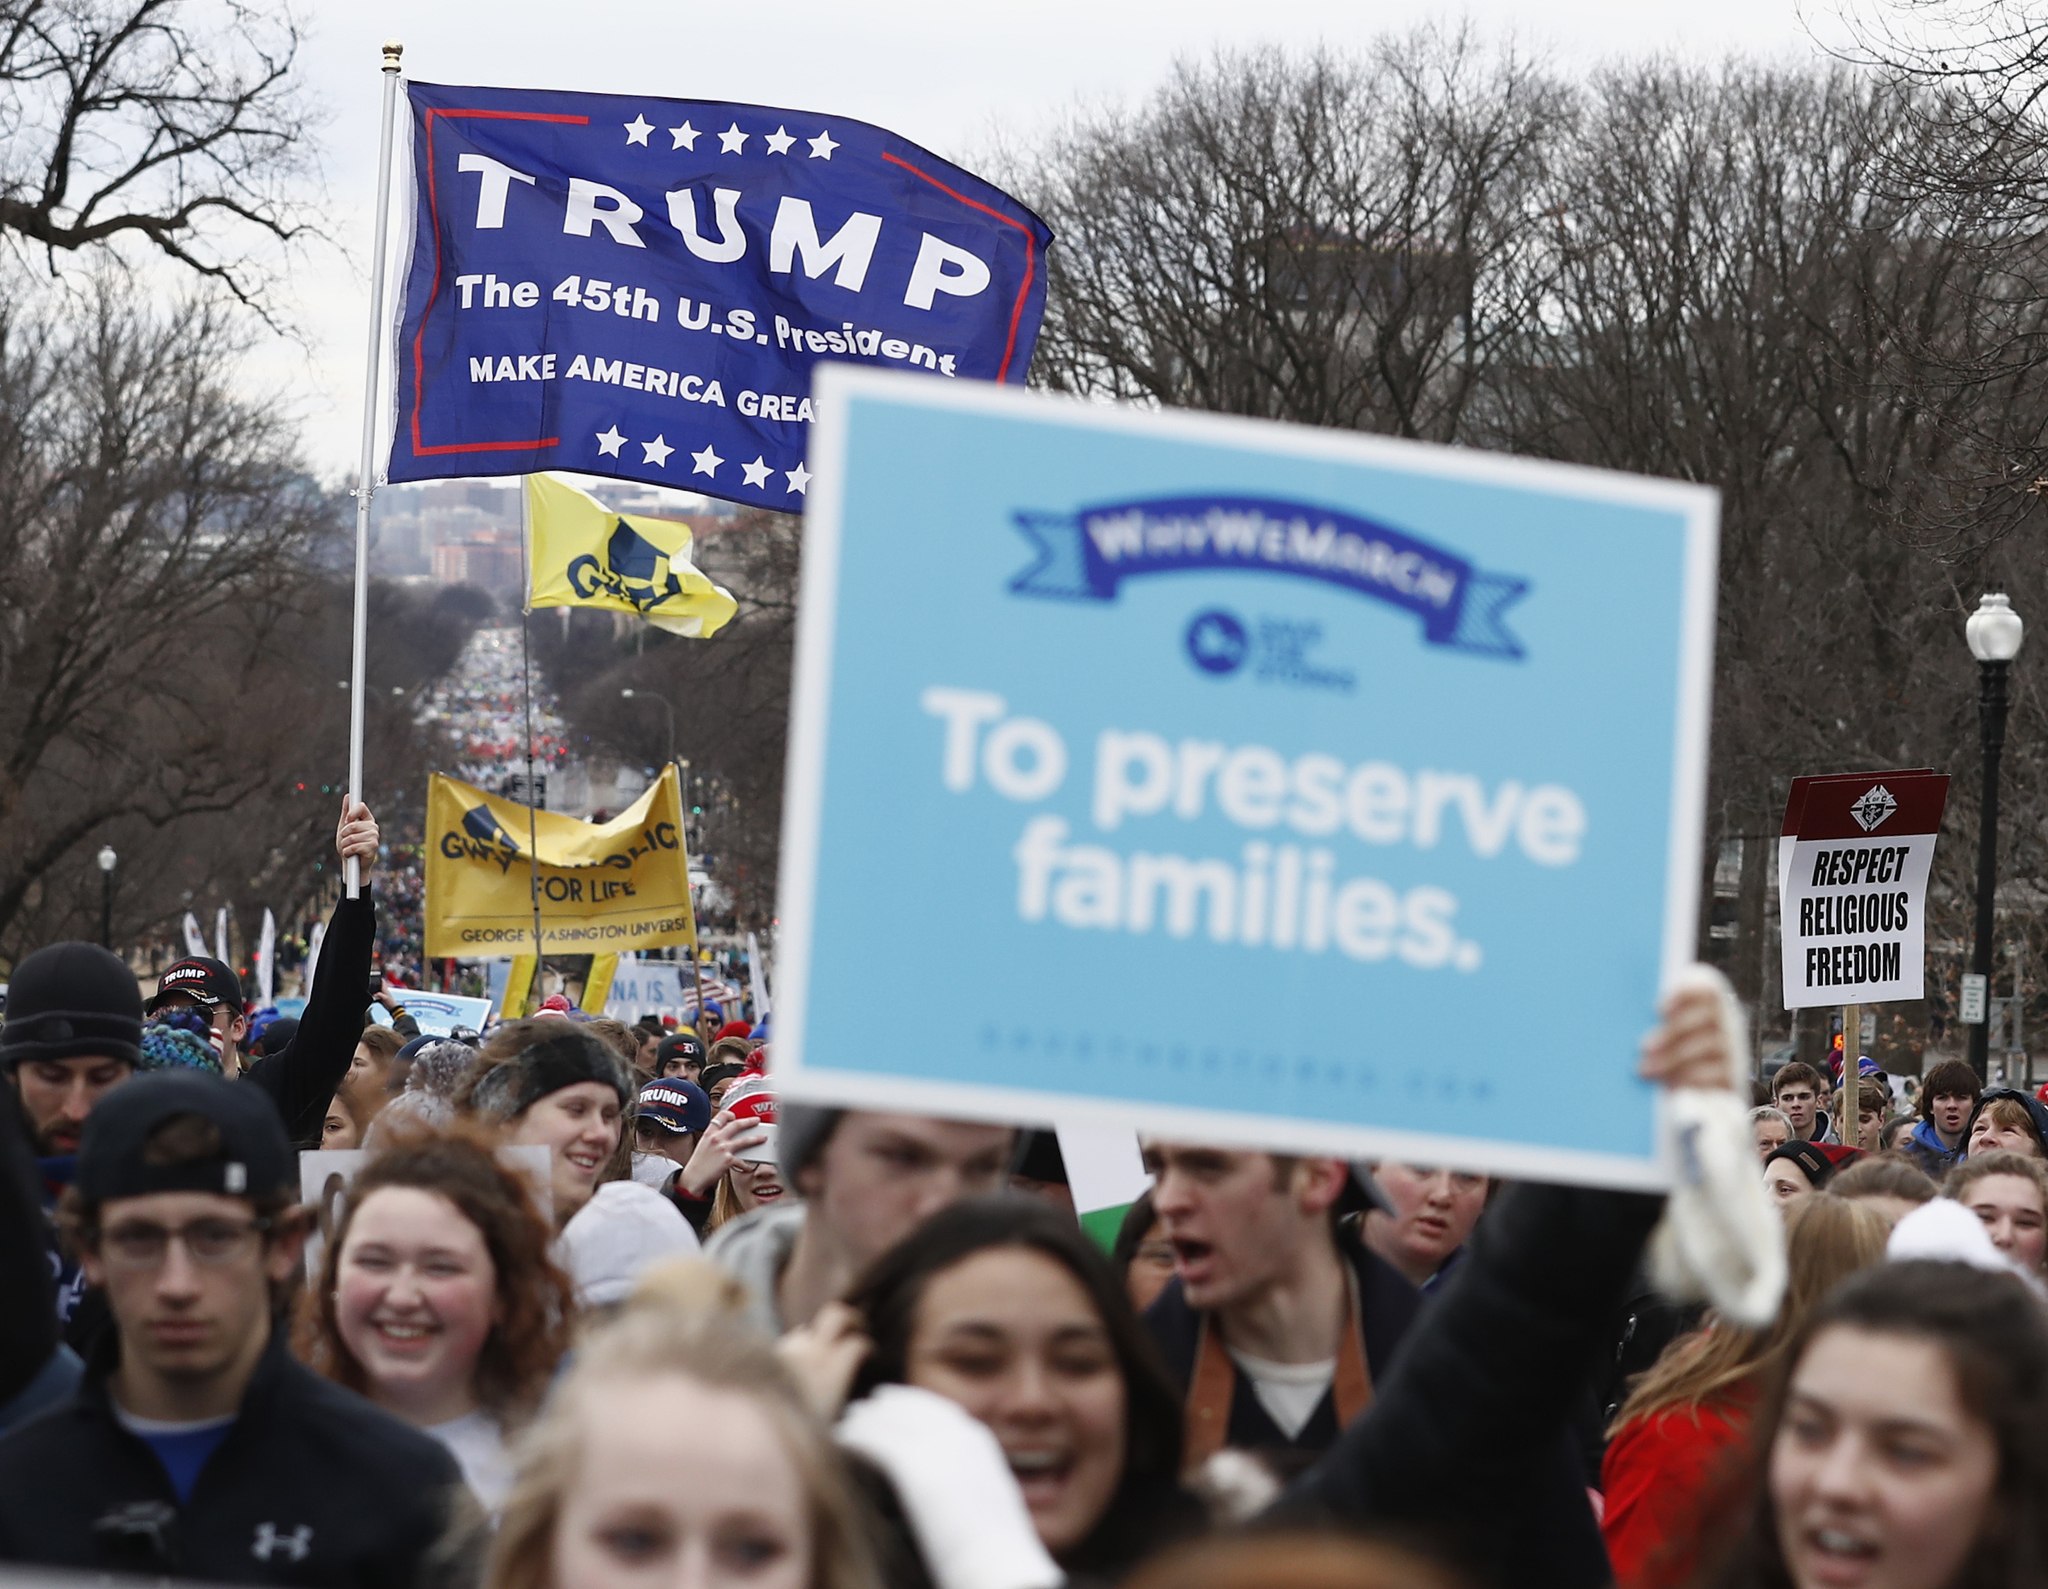 Anti-abortion activists and supporters of President Donald Trump march up Constitution Avenue en route to the Supreme Court in Washington, D.C., on Friday during the 44th annual March for Life. (Carolyn Kaster/The Associated Press)